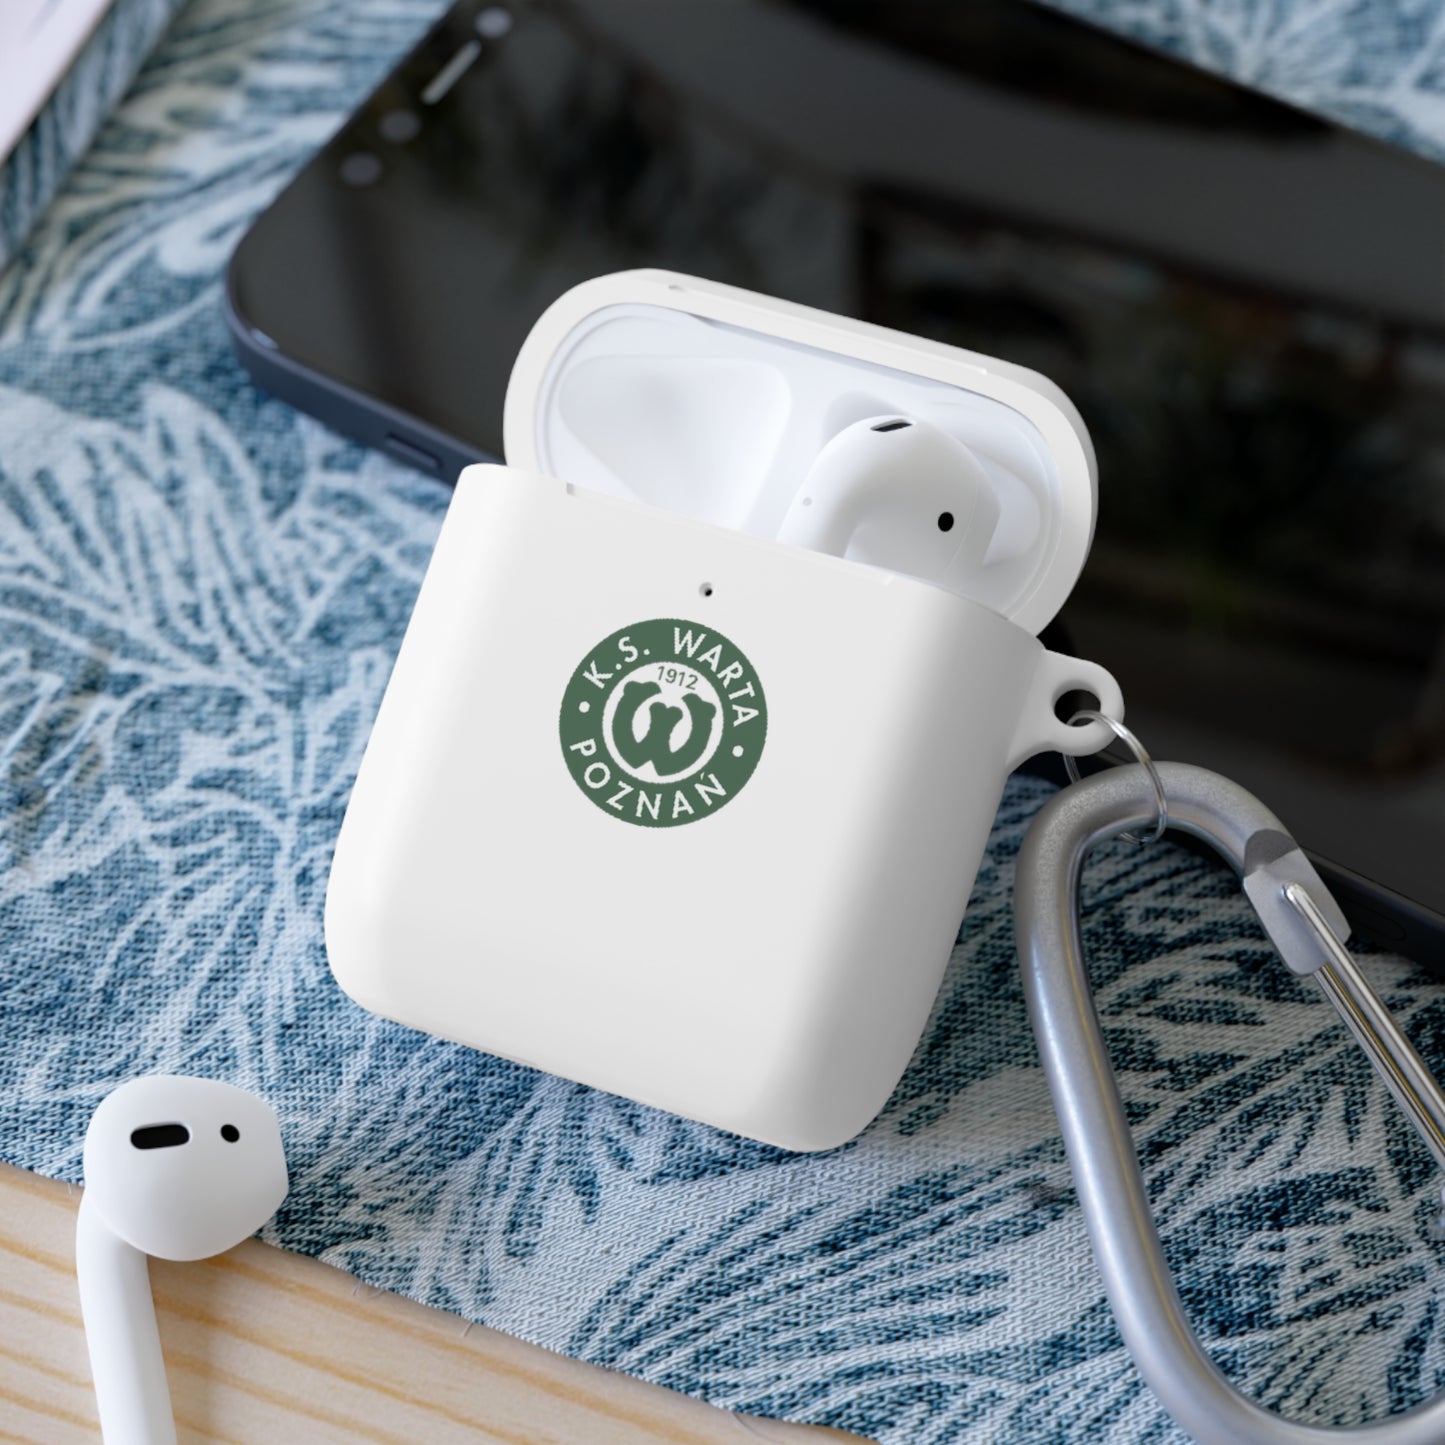 KS Warta Poznan AirPods and AirPods Pro Case Cover